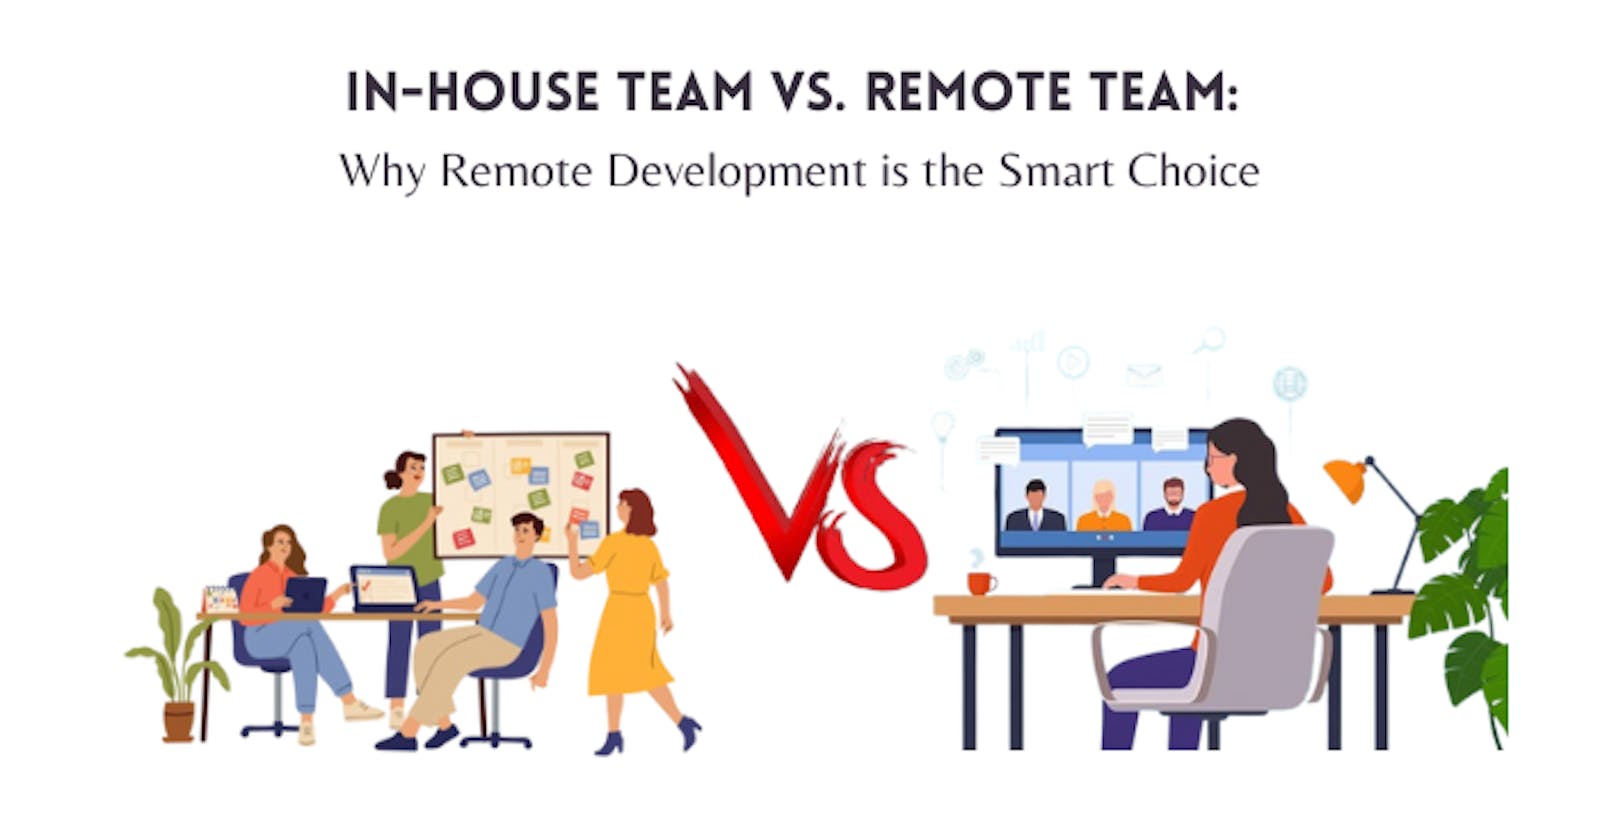 In-House Team vs. Remote Team: 
Why Remote Development is the Smart Choice